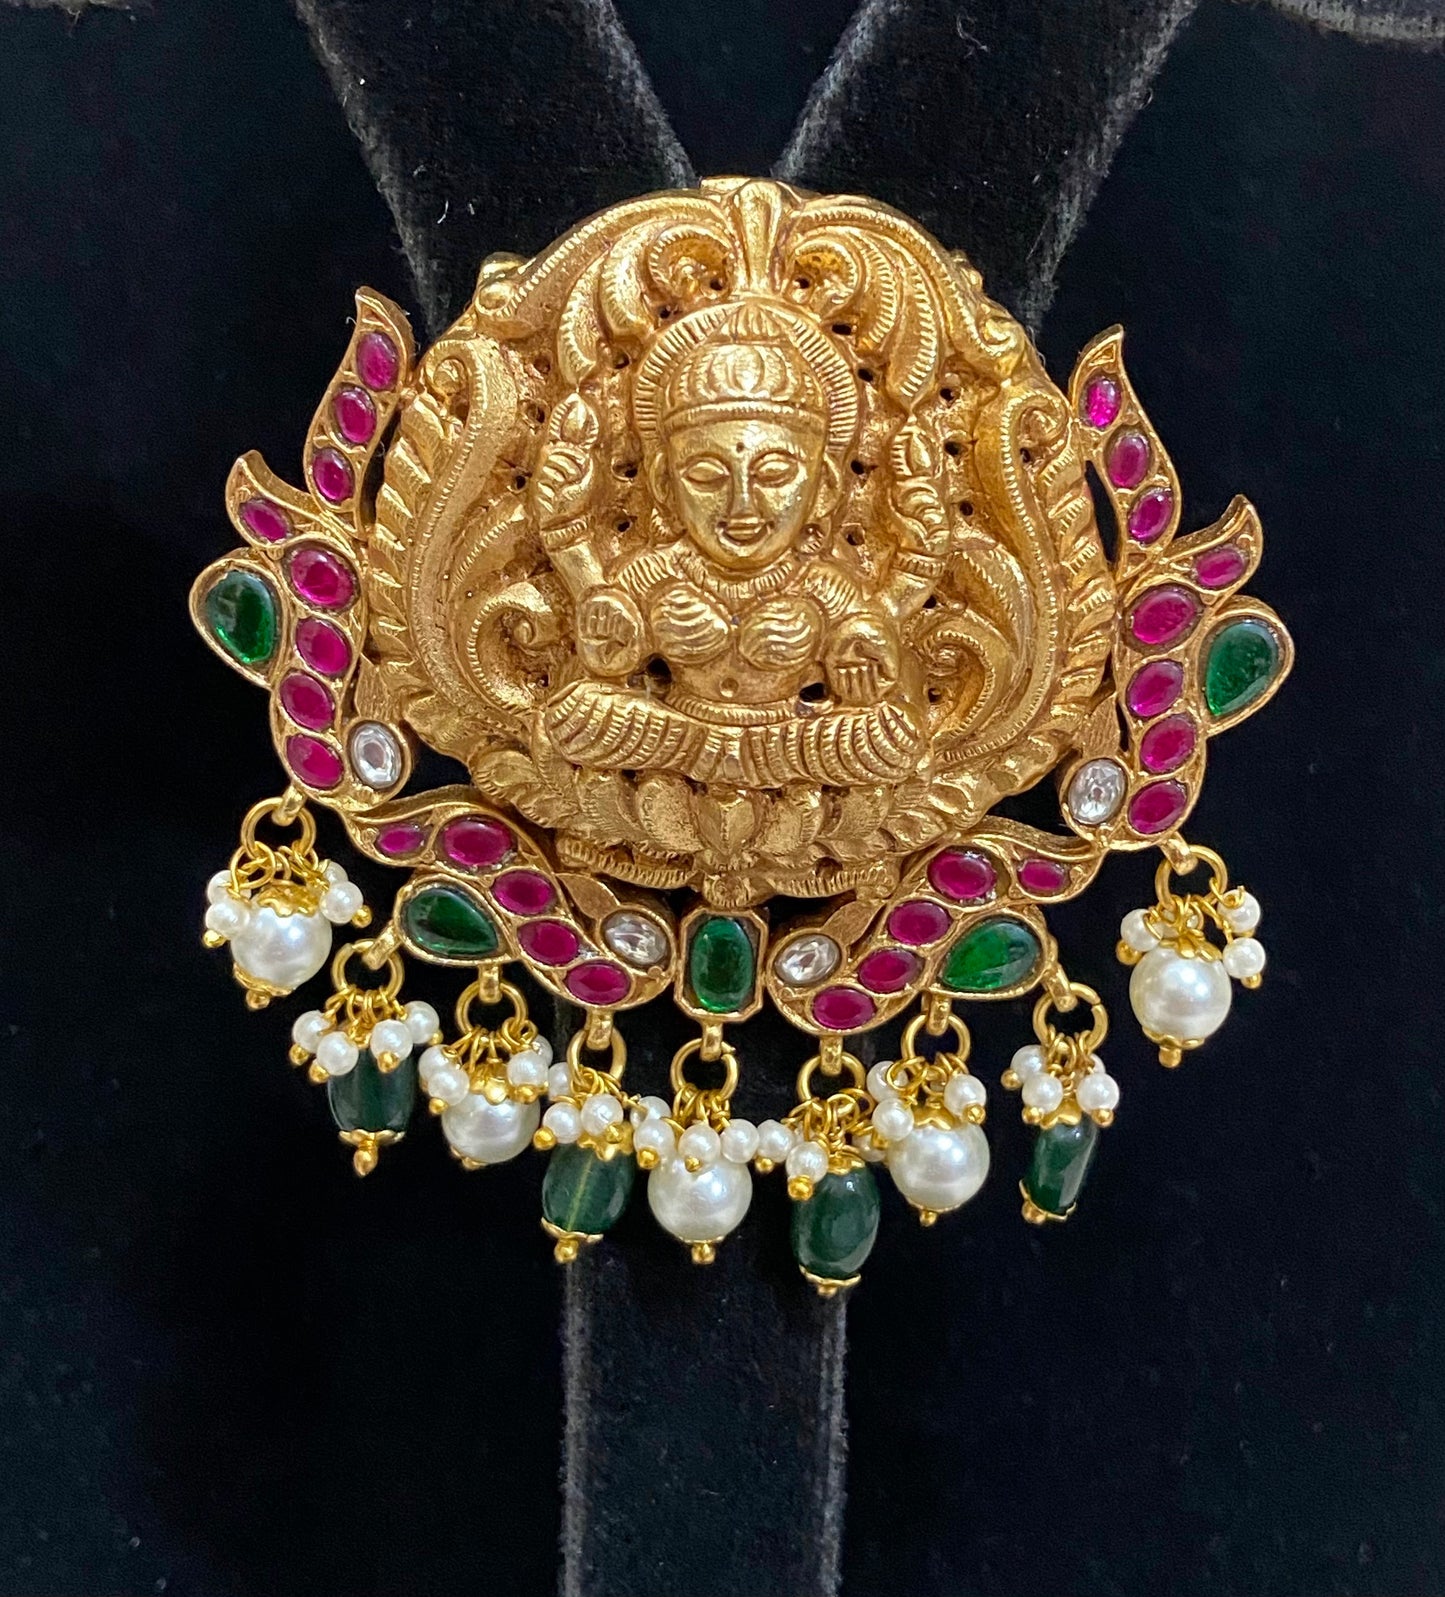 Temple pendant | South Indian jewelry